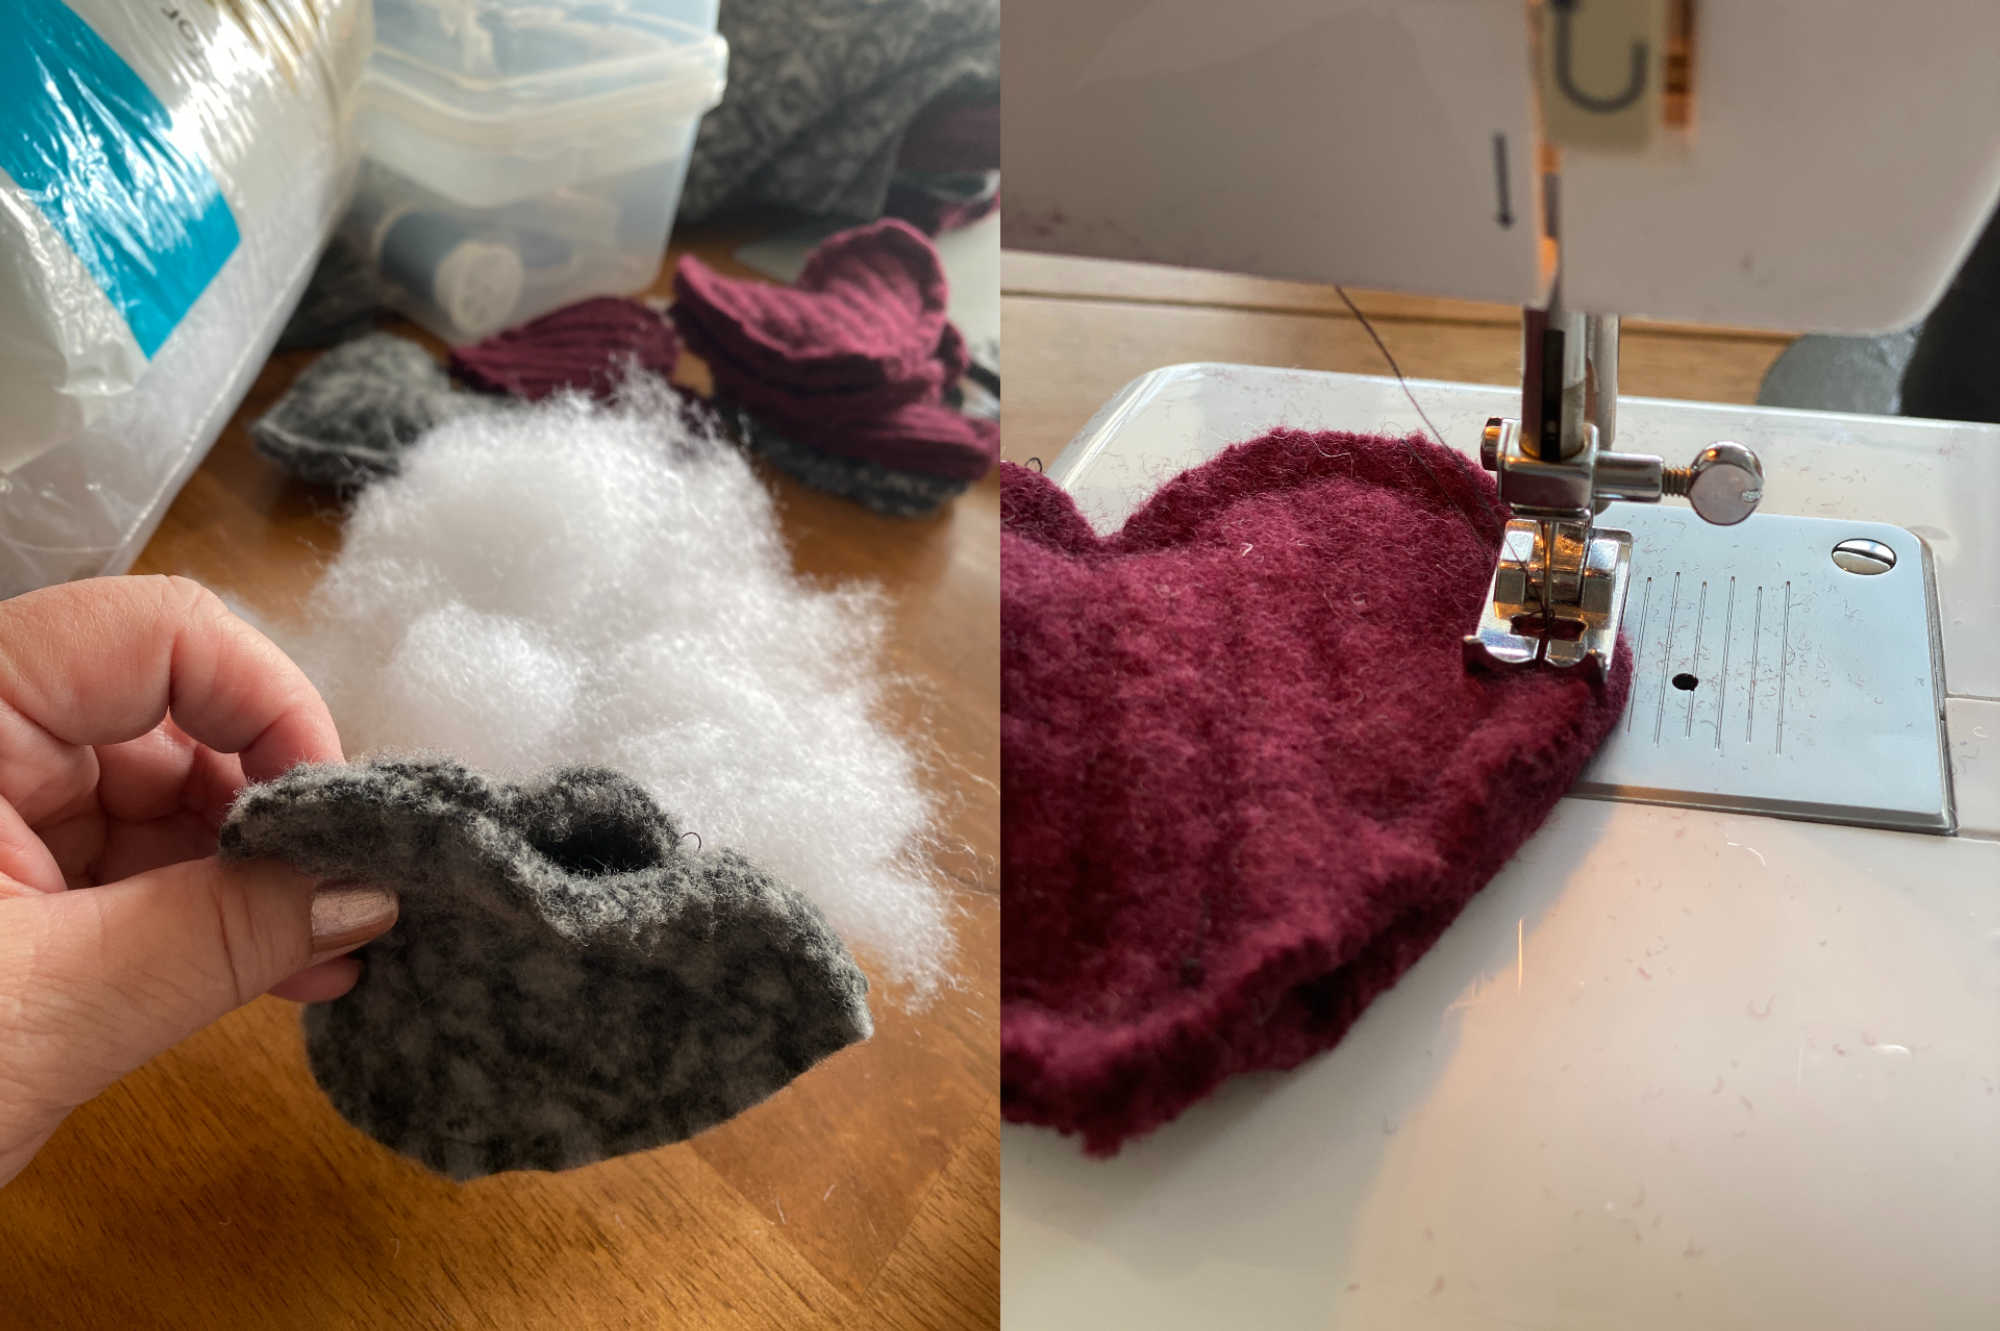 On the left, a grey felted heart is stuffed with cotton through an opening. On the right, that opening is sewed shut with a sewing machine.